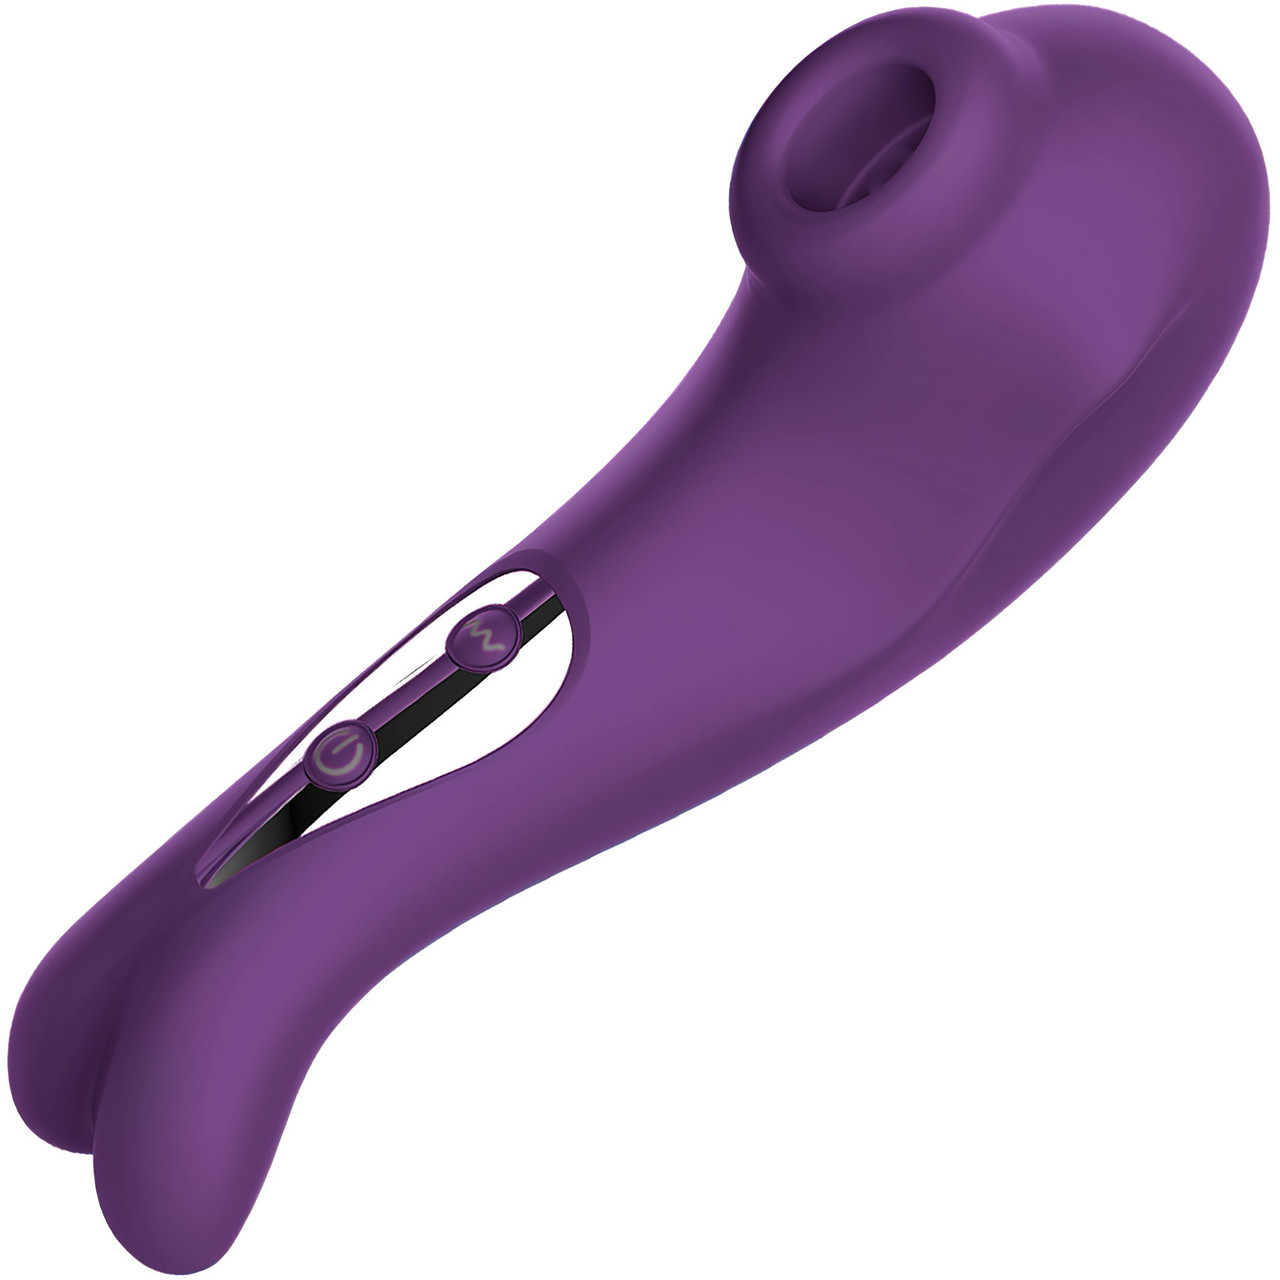 Tracy's Dog P. Cat Clitoral Sucking Vibrator for Clit Nipple